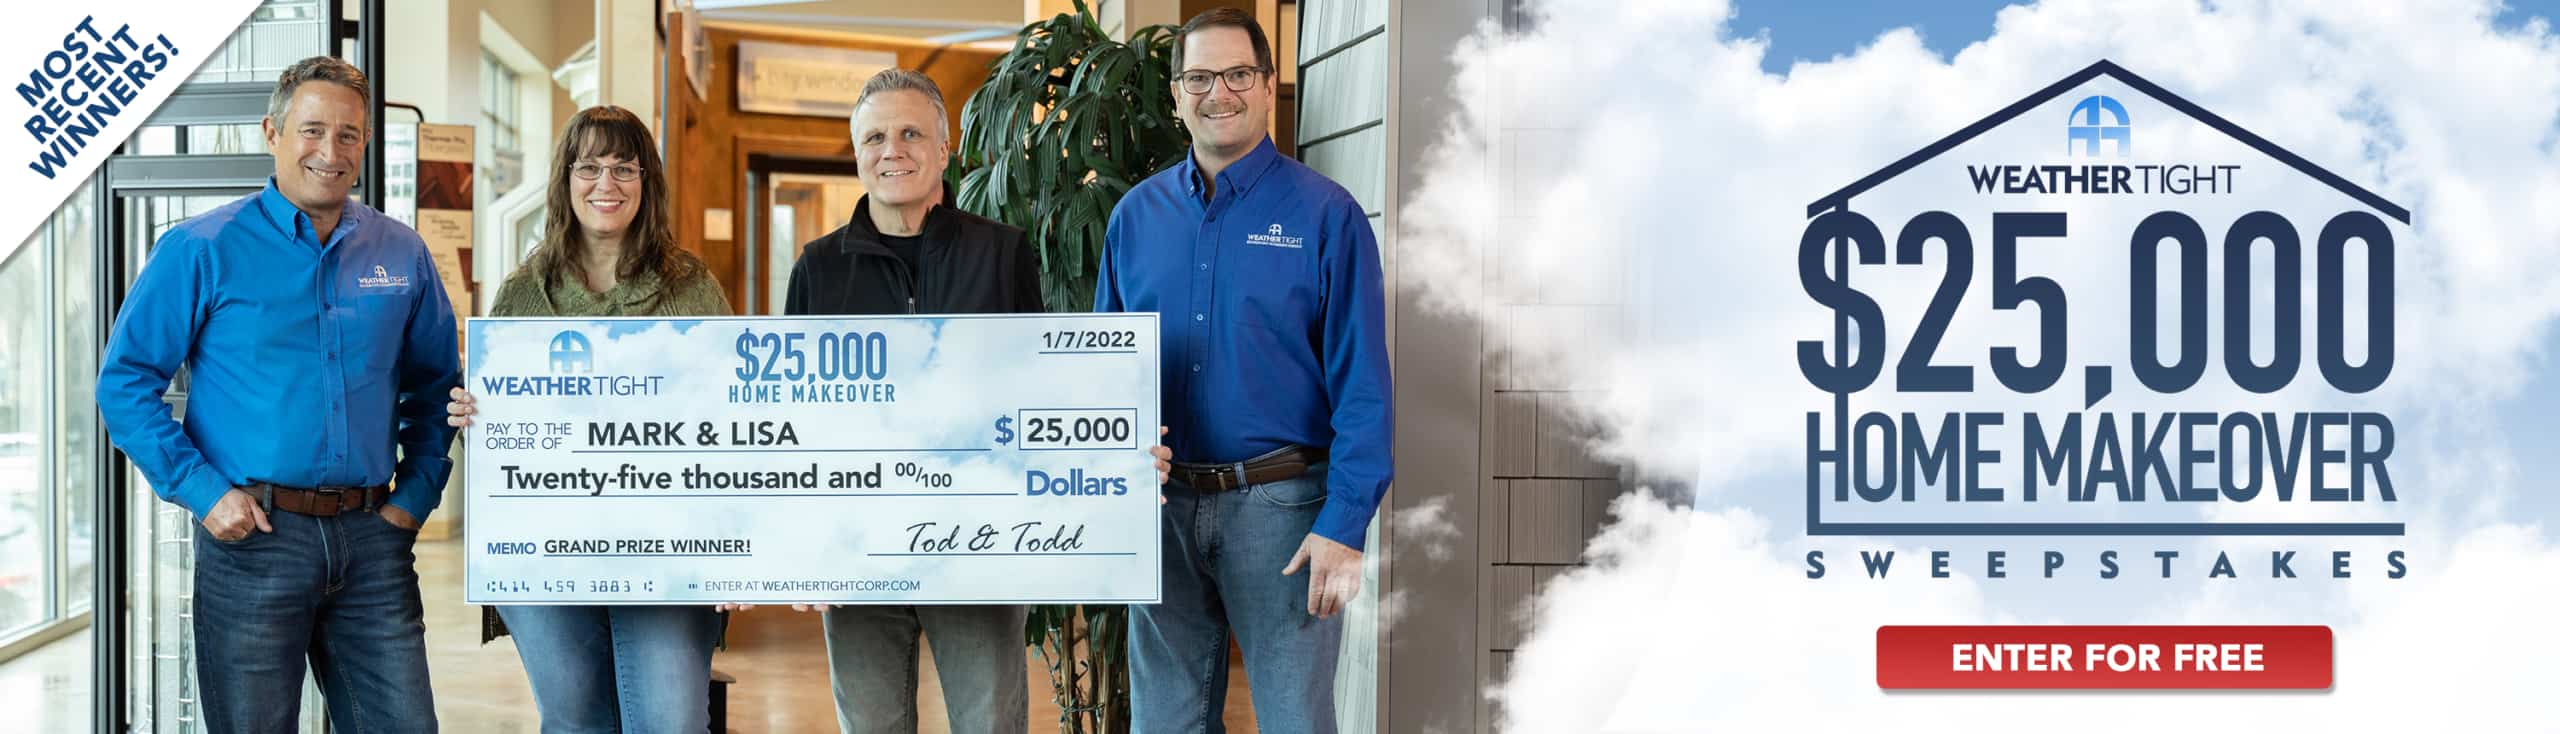 Weather Tight's $25,000 Home Makeover Sweepstakes Winner Mark & Lisa